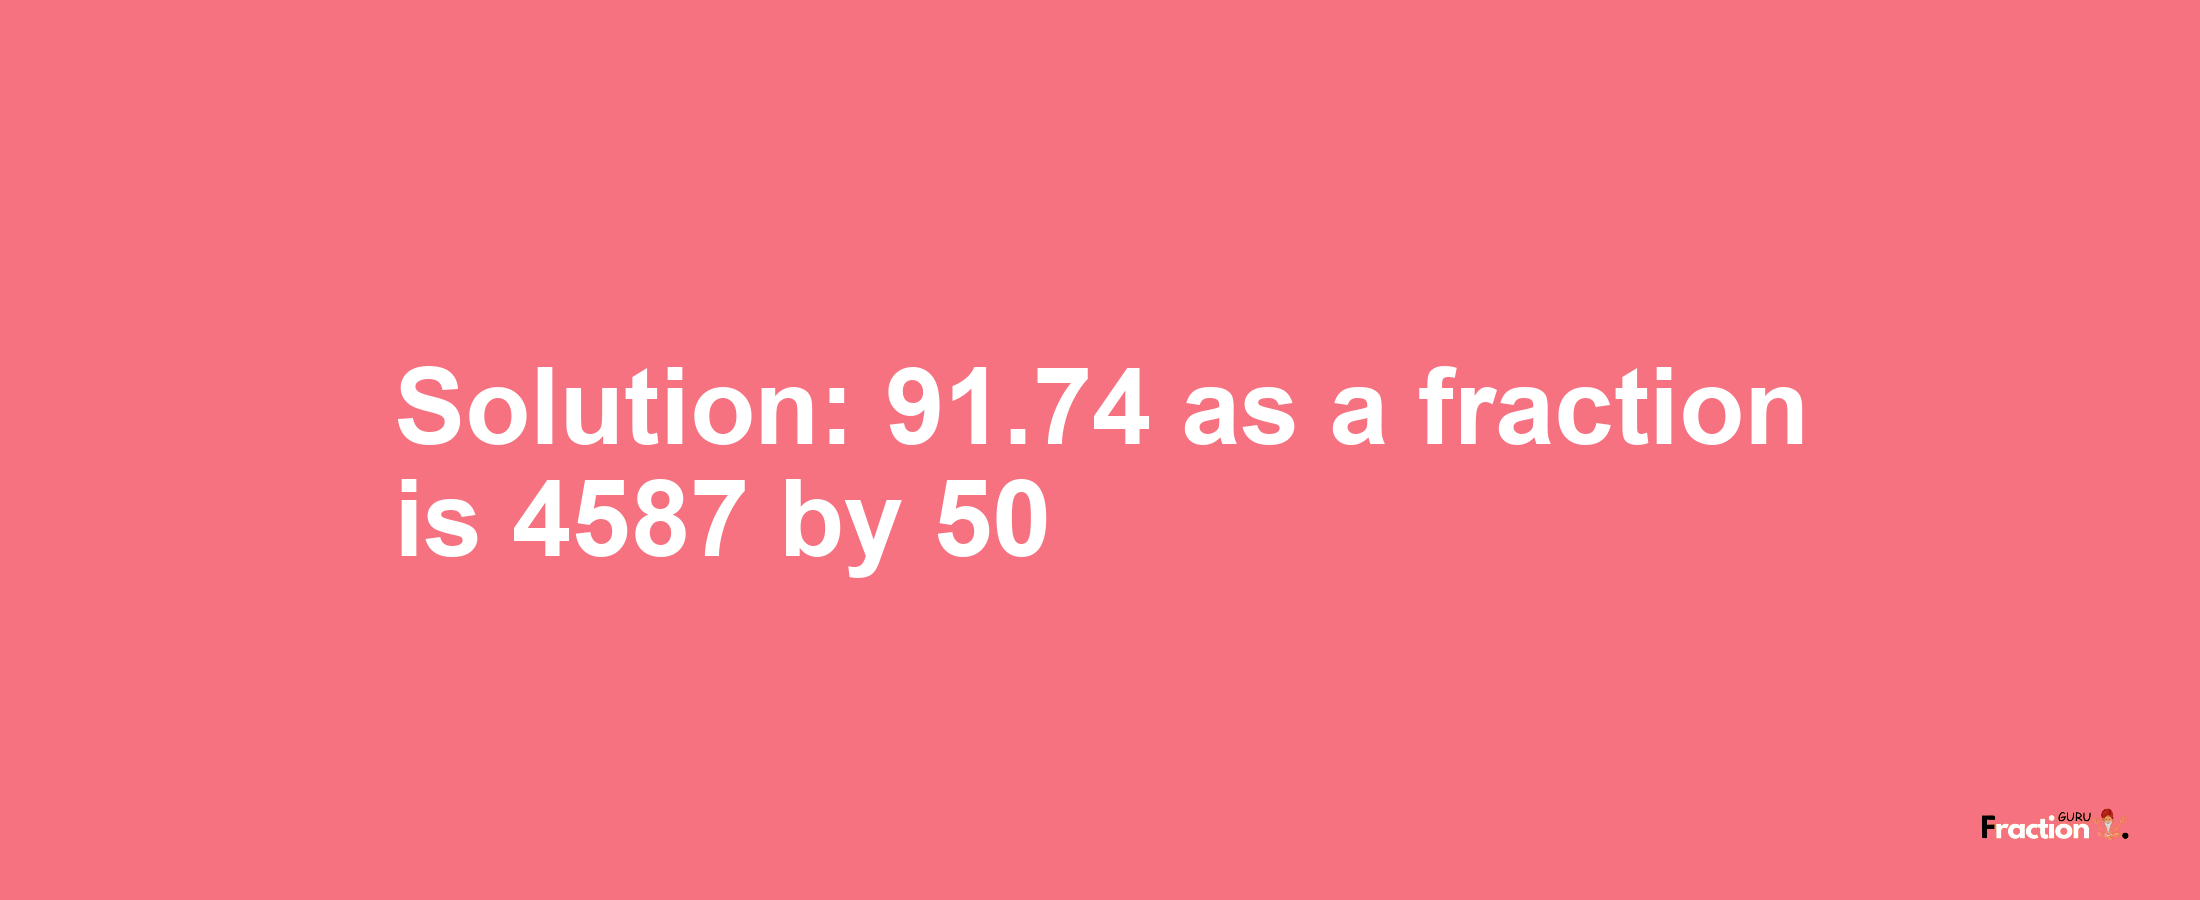 Solution:91.74 as a fraction is 4587/50